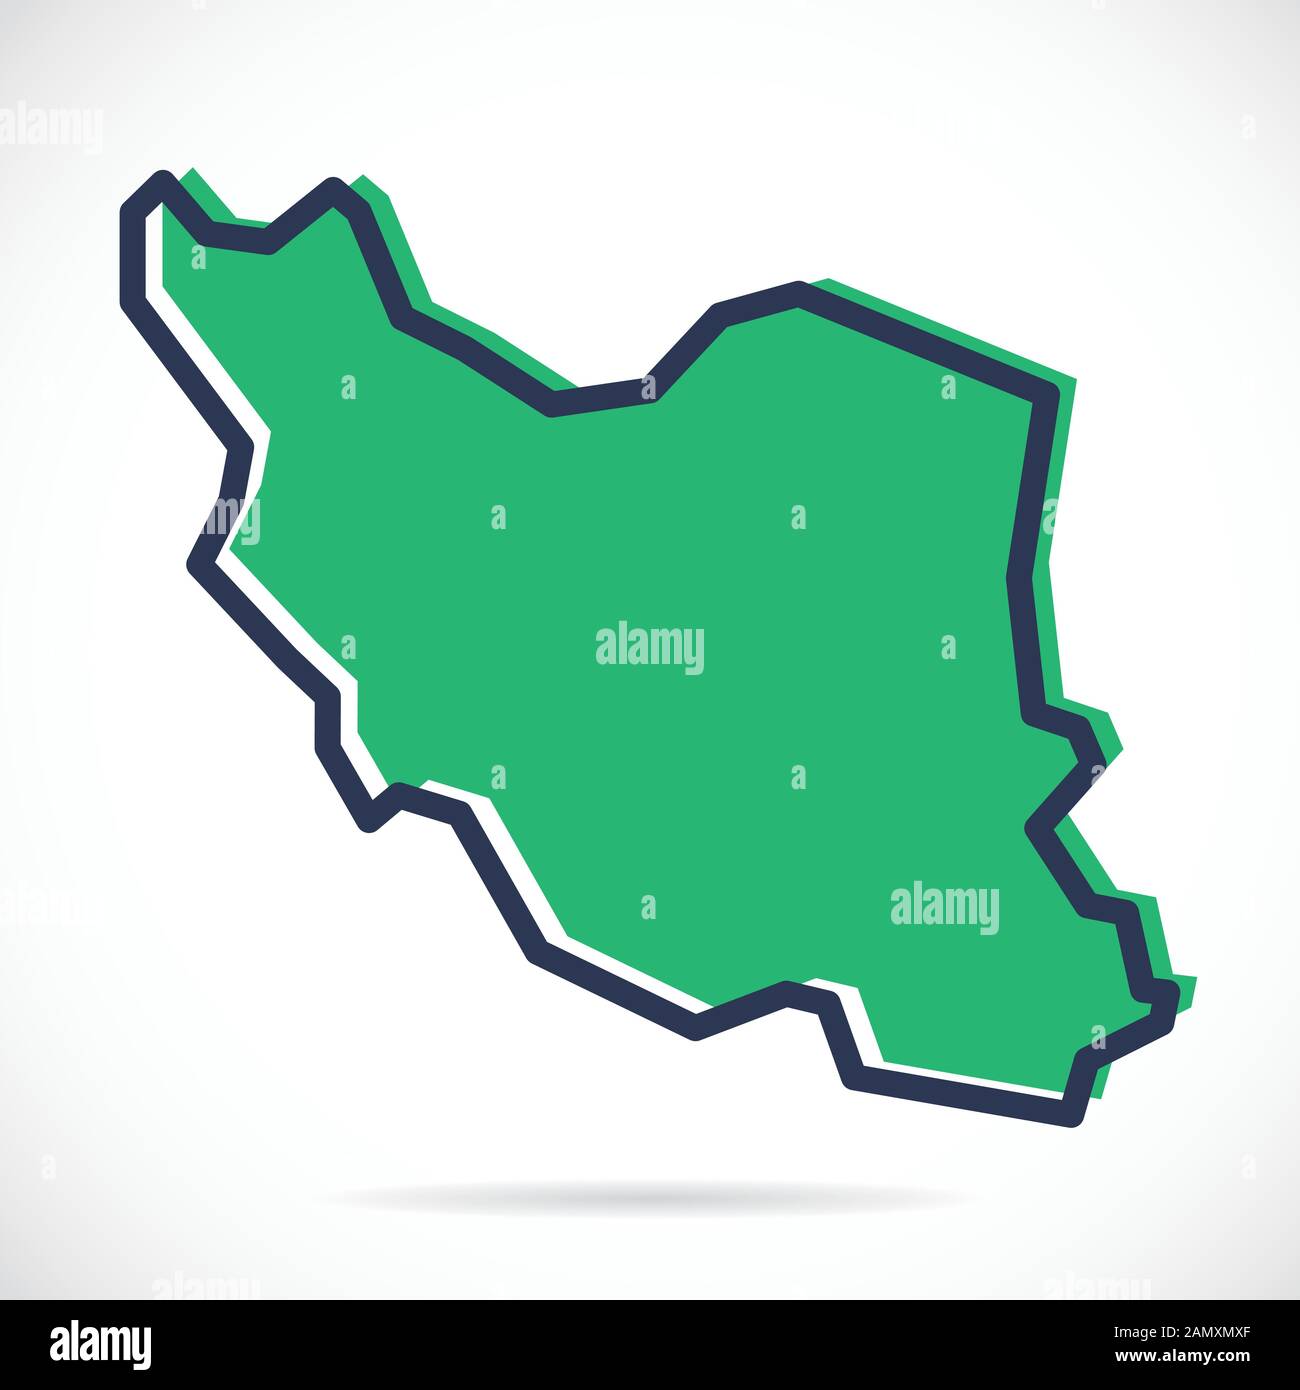 Stylized simple outline map of Iran Stock Vector